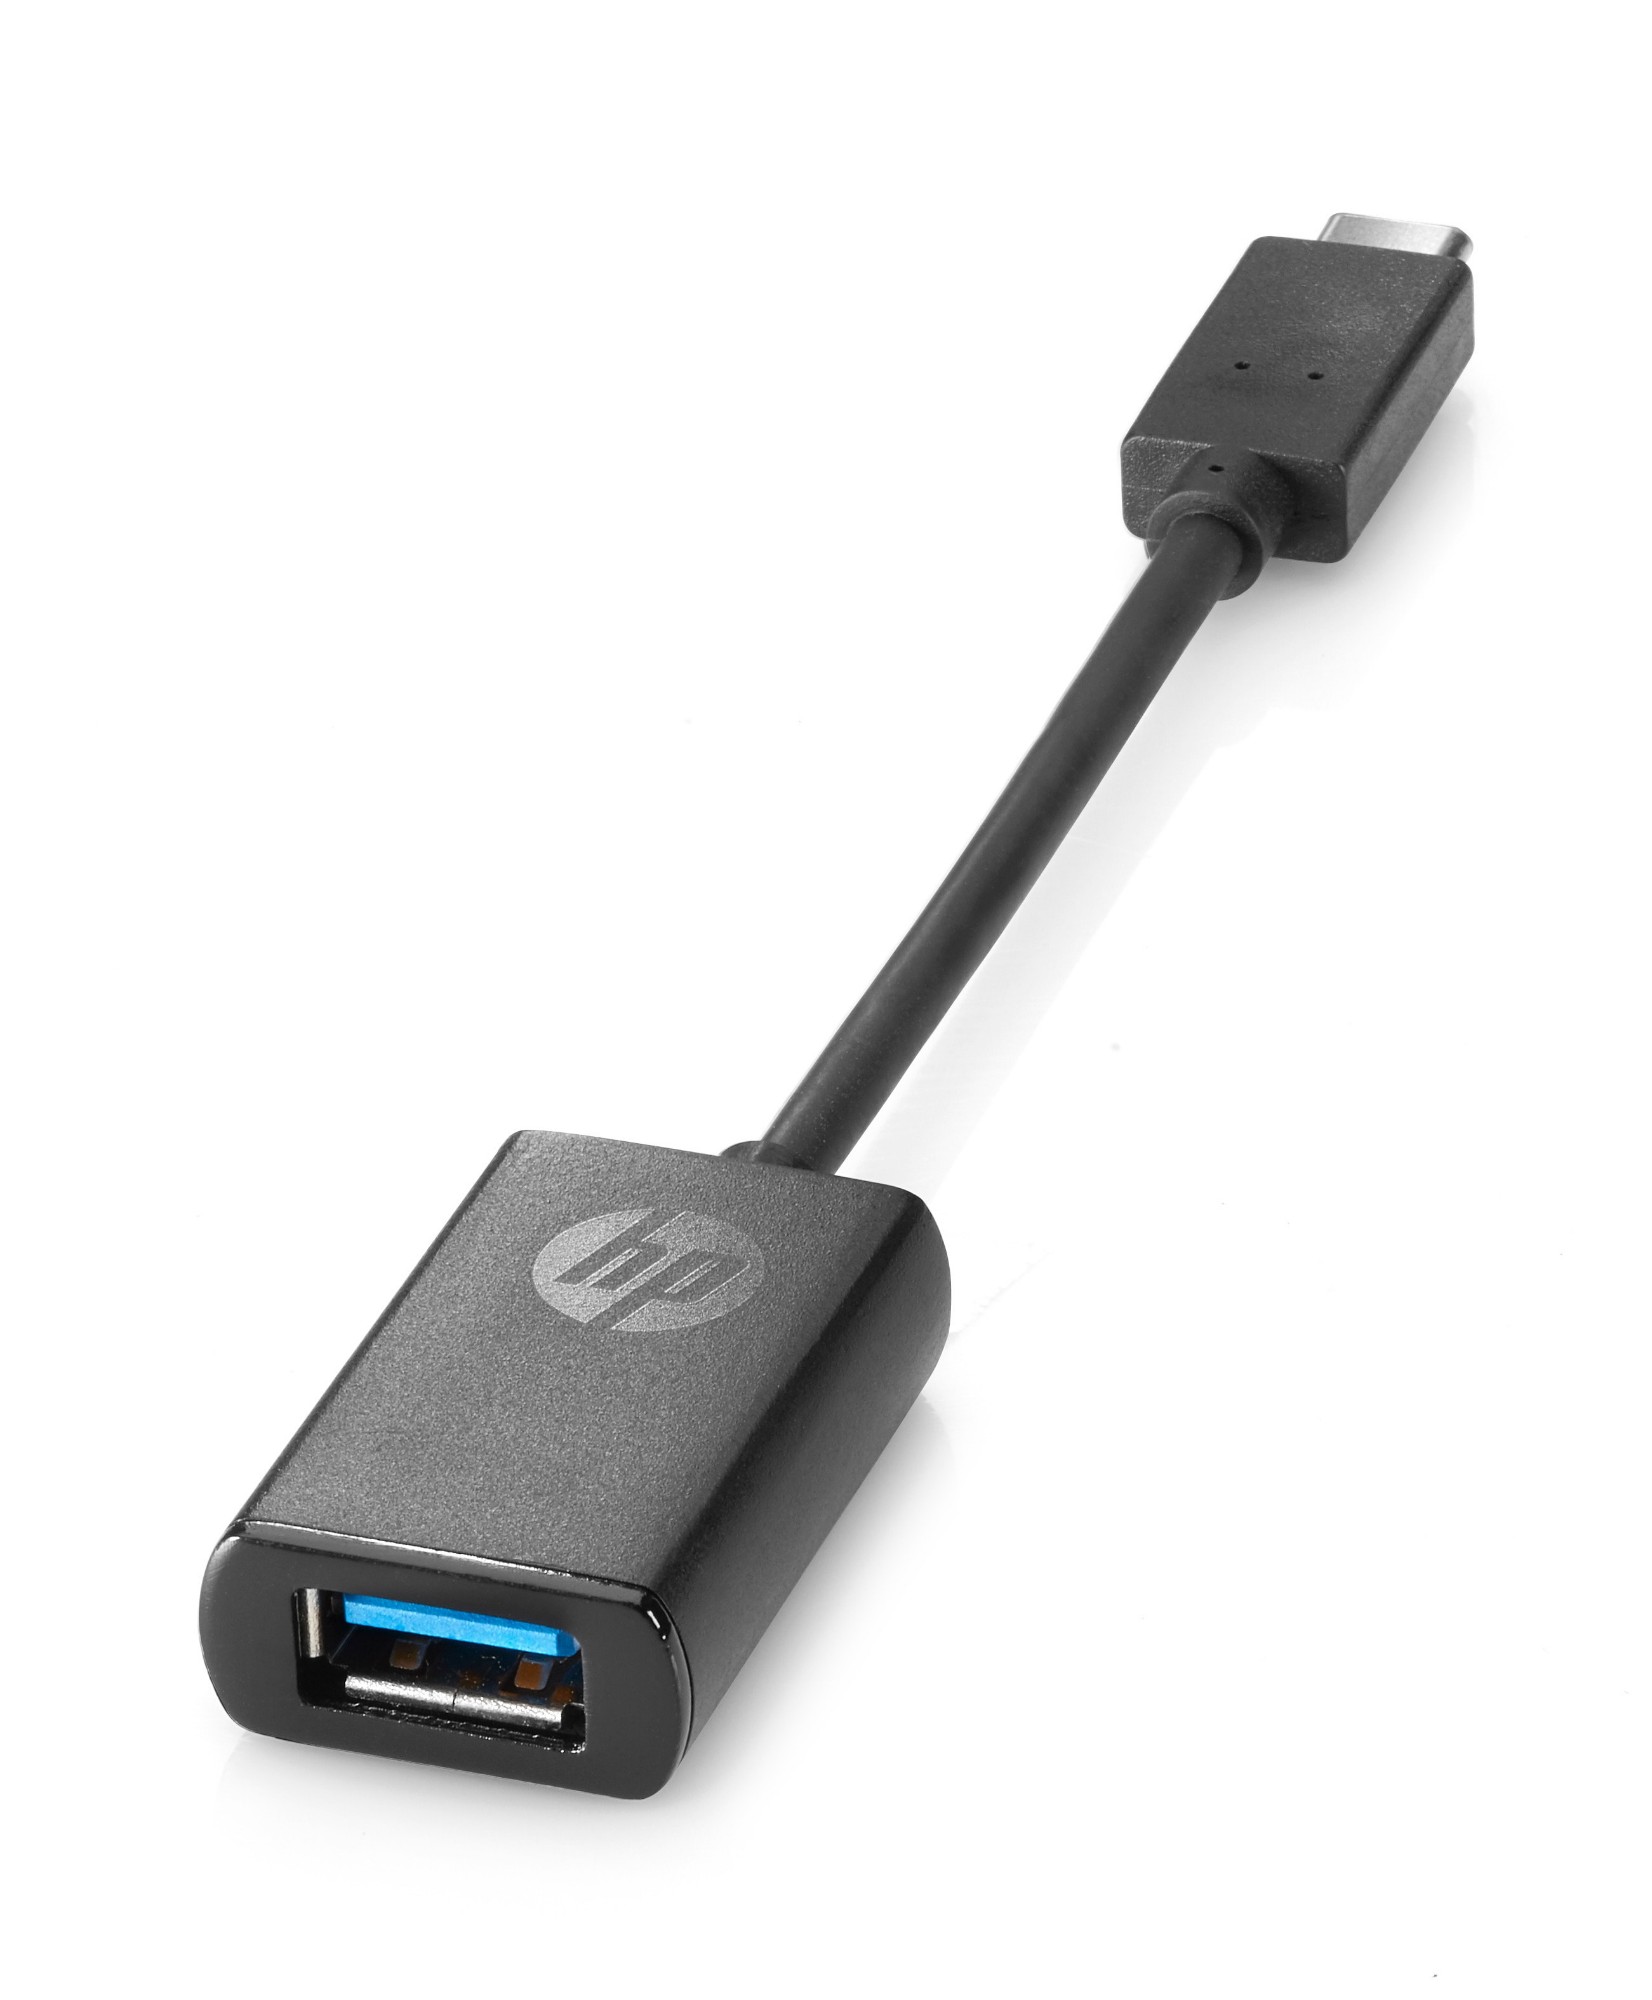 Photos - Cable (video, audio, USB) HP USB-C to USB 3.0 Adapter N2Z63AA#AC3 